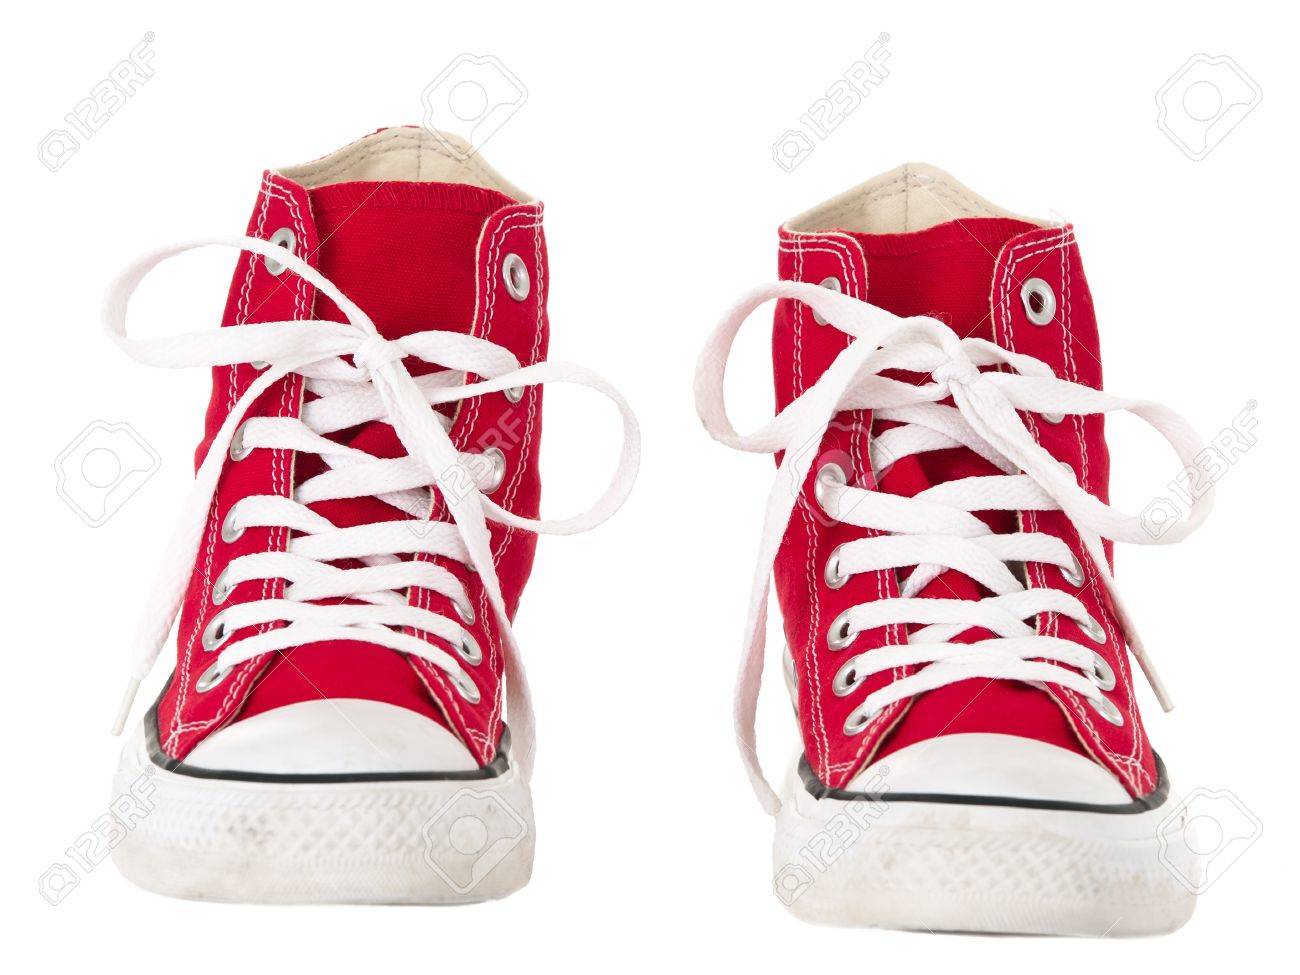 Vintage Red Shoes Front On Pure White Background Stock Photo